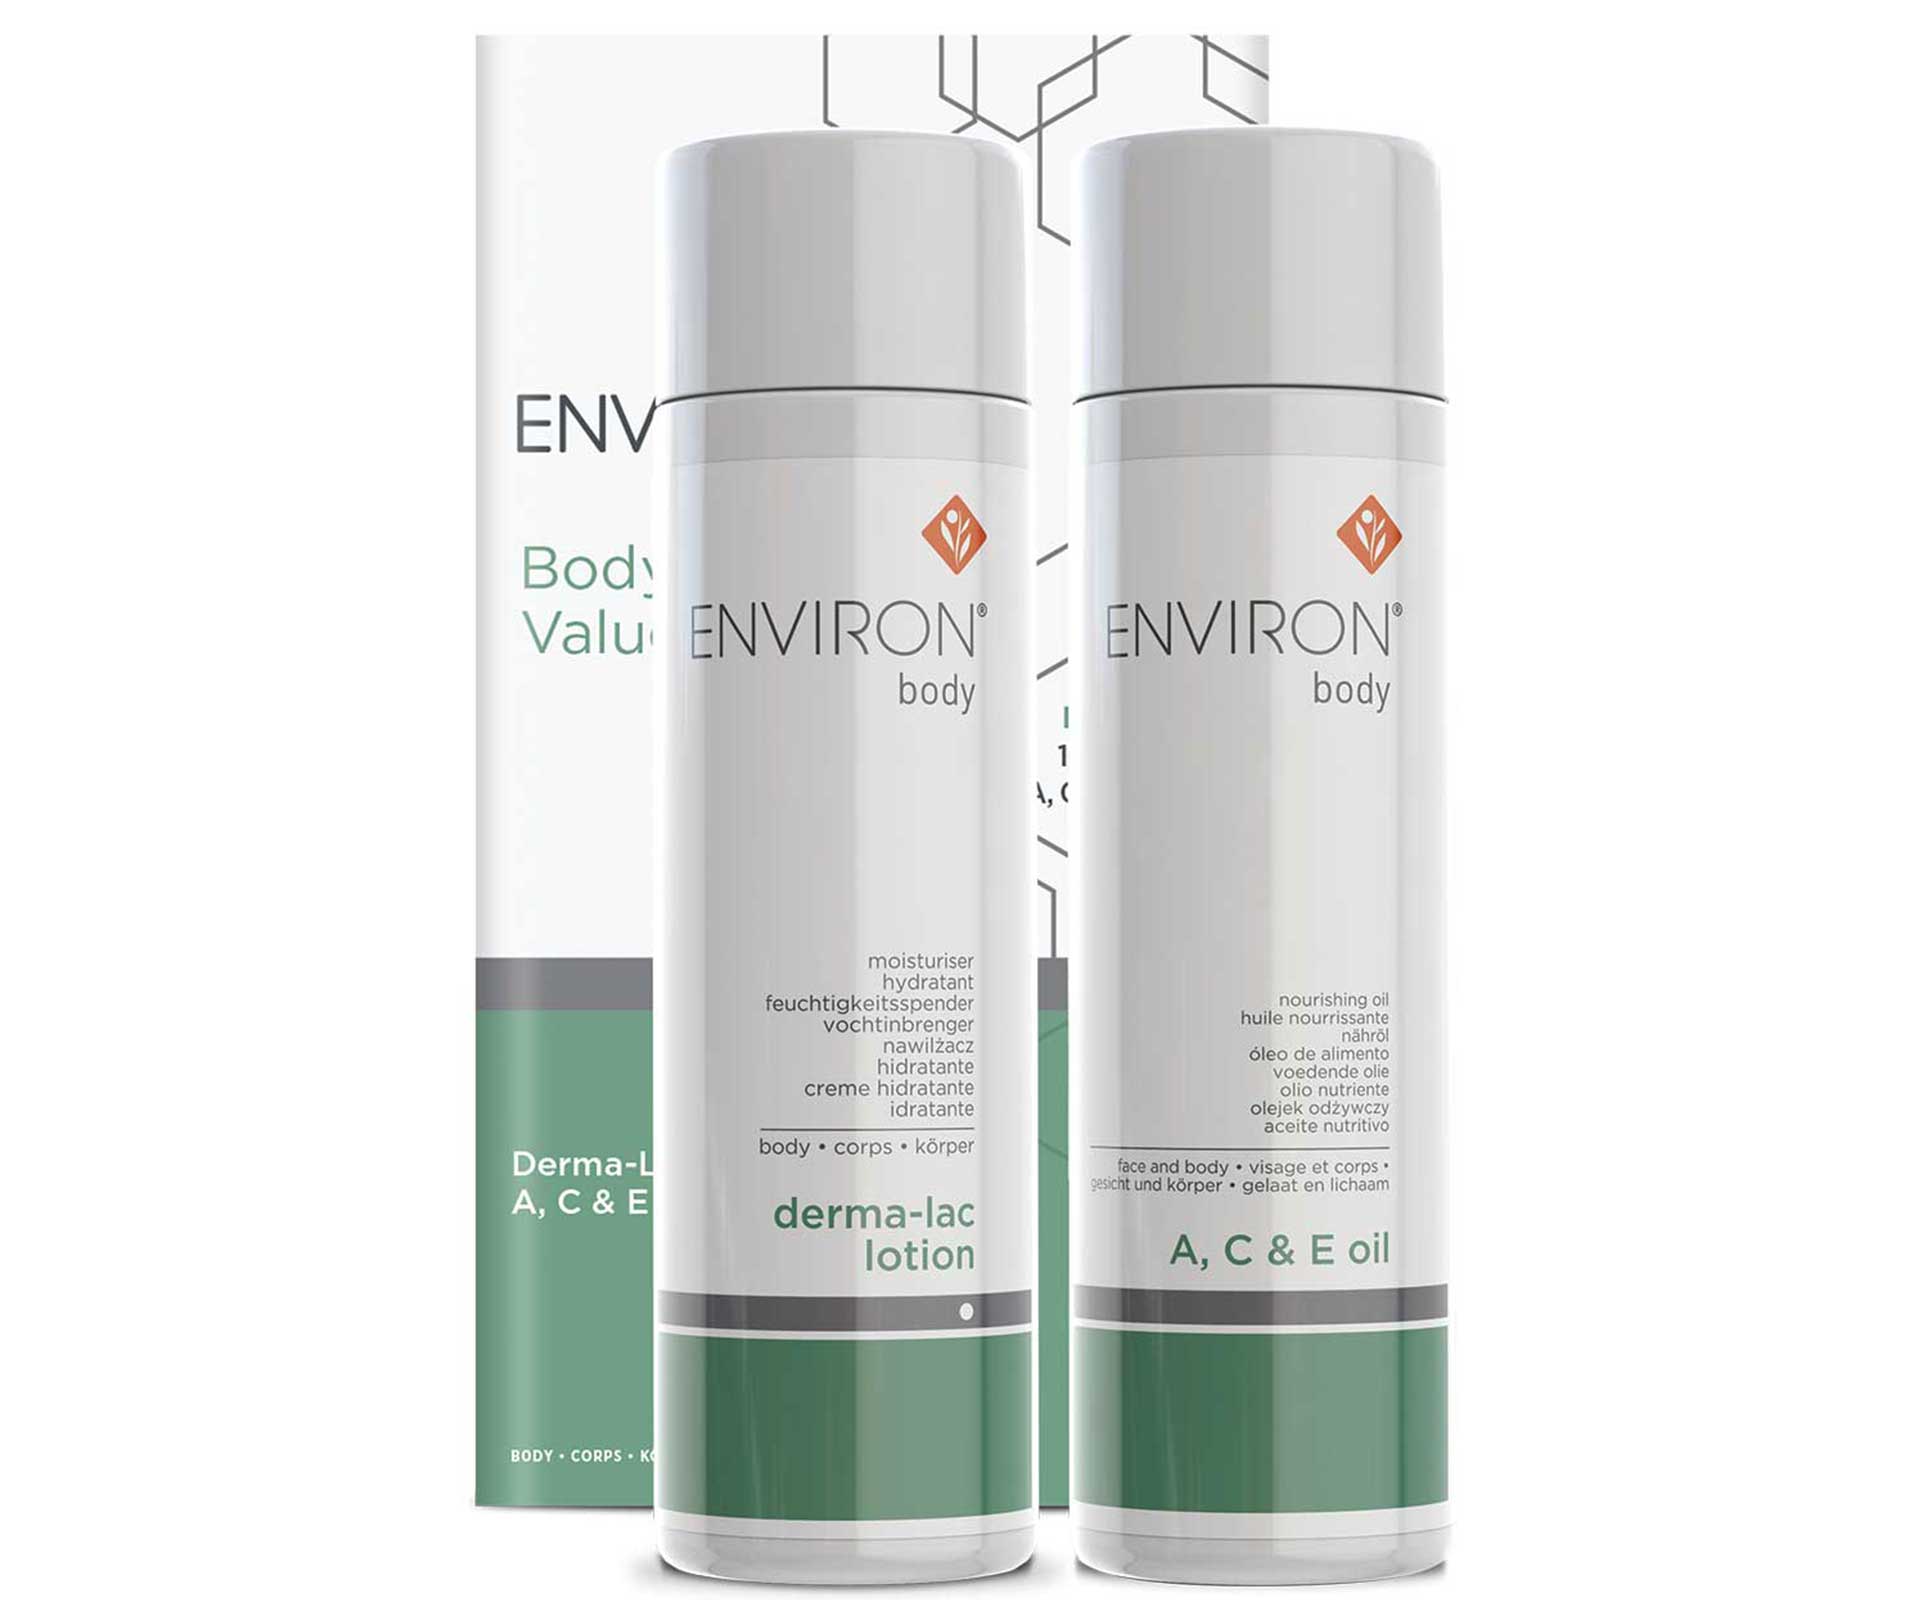 Win an Environ Body Essentials prize pack